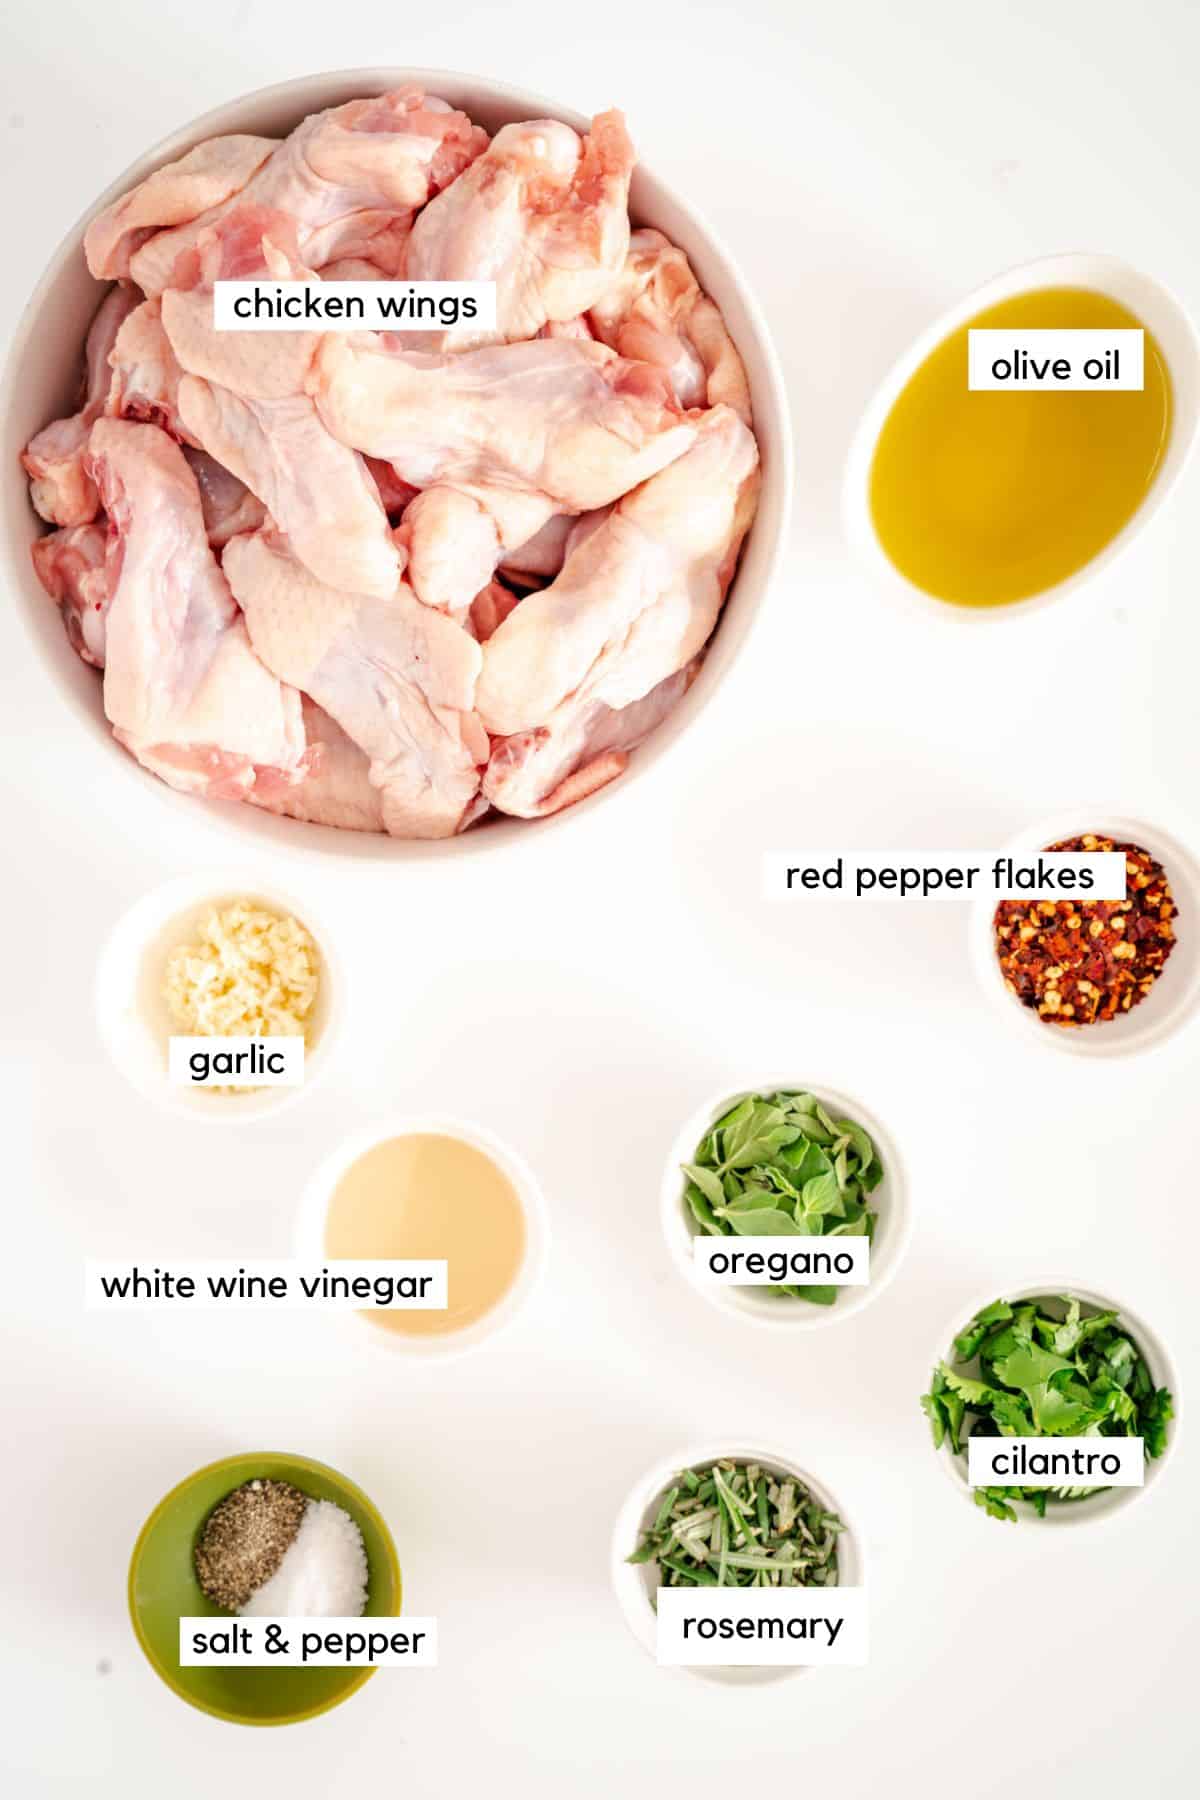 labeled ingredients for italian style chicken wings.